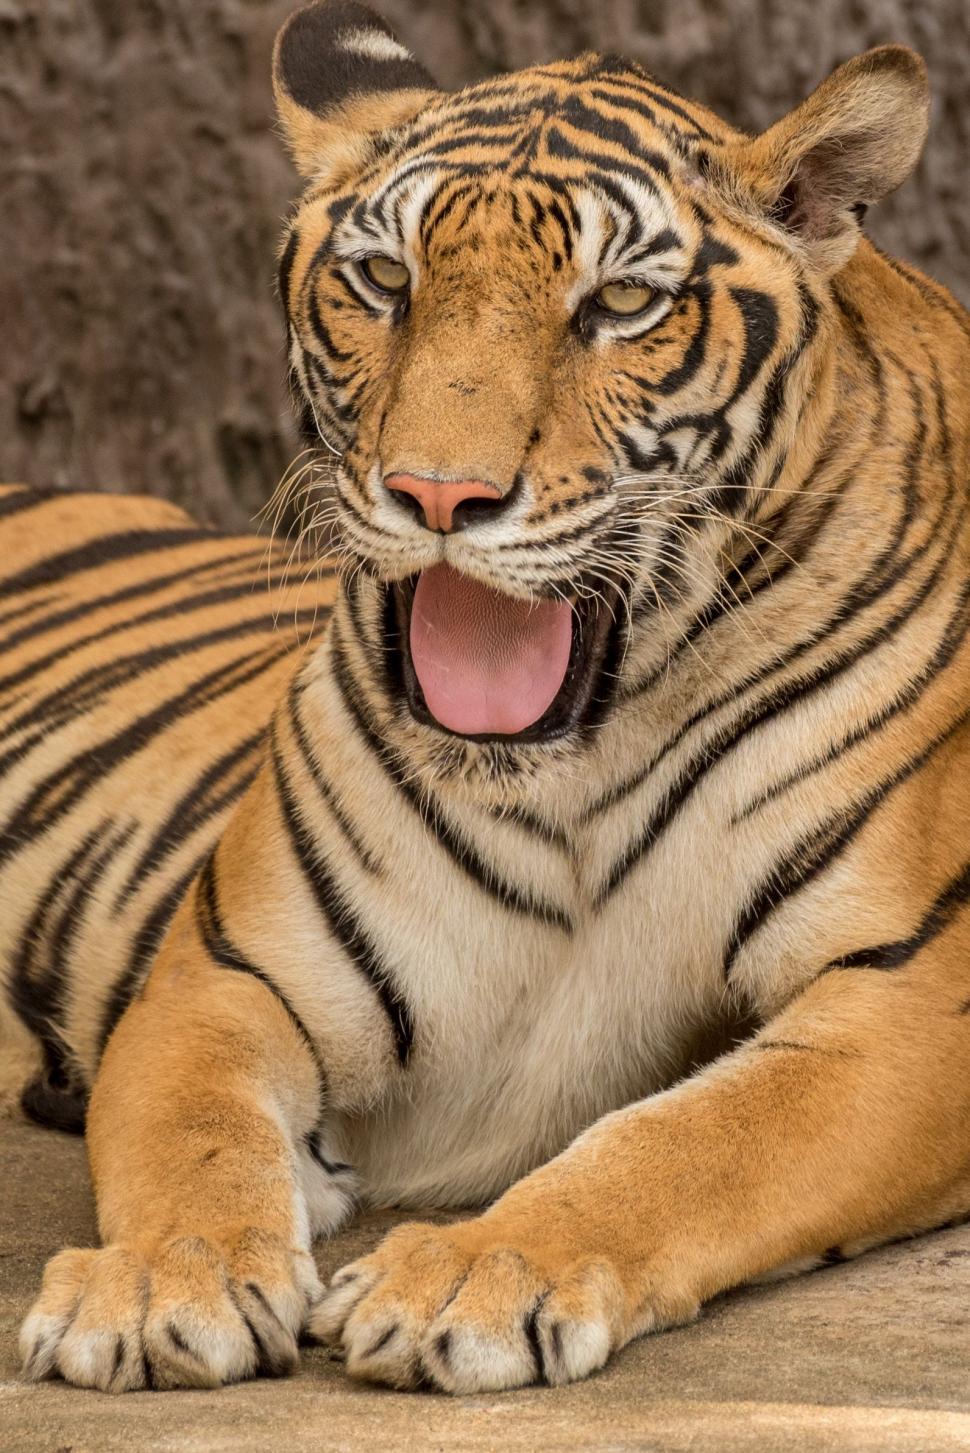 Free Image of Tiger Laying Down With Tongue Out 